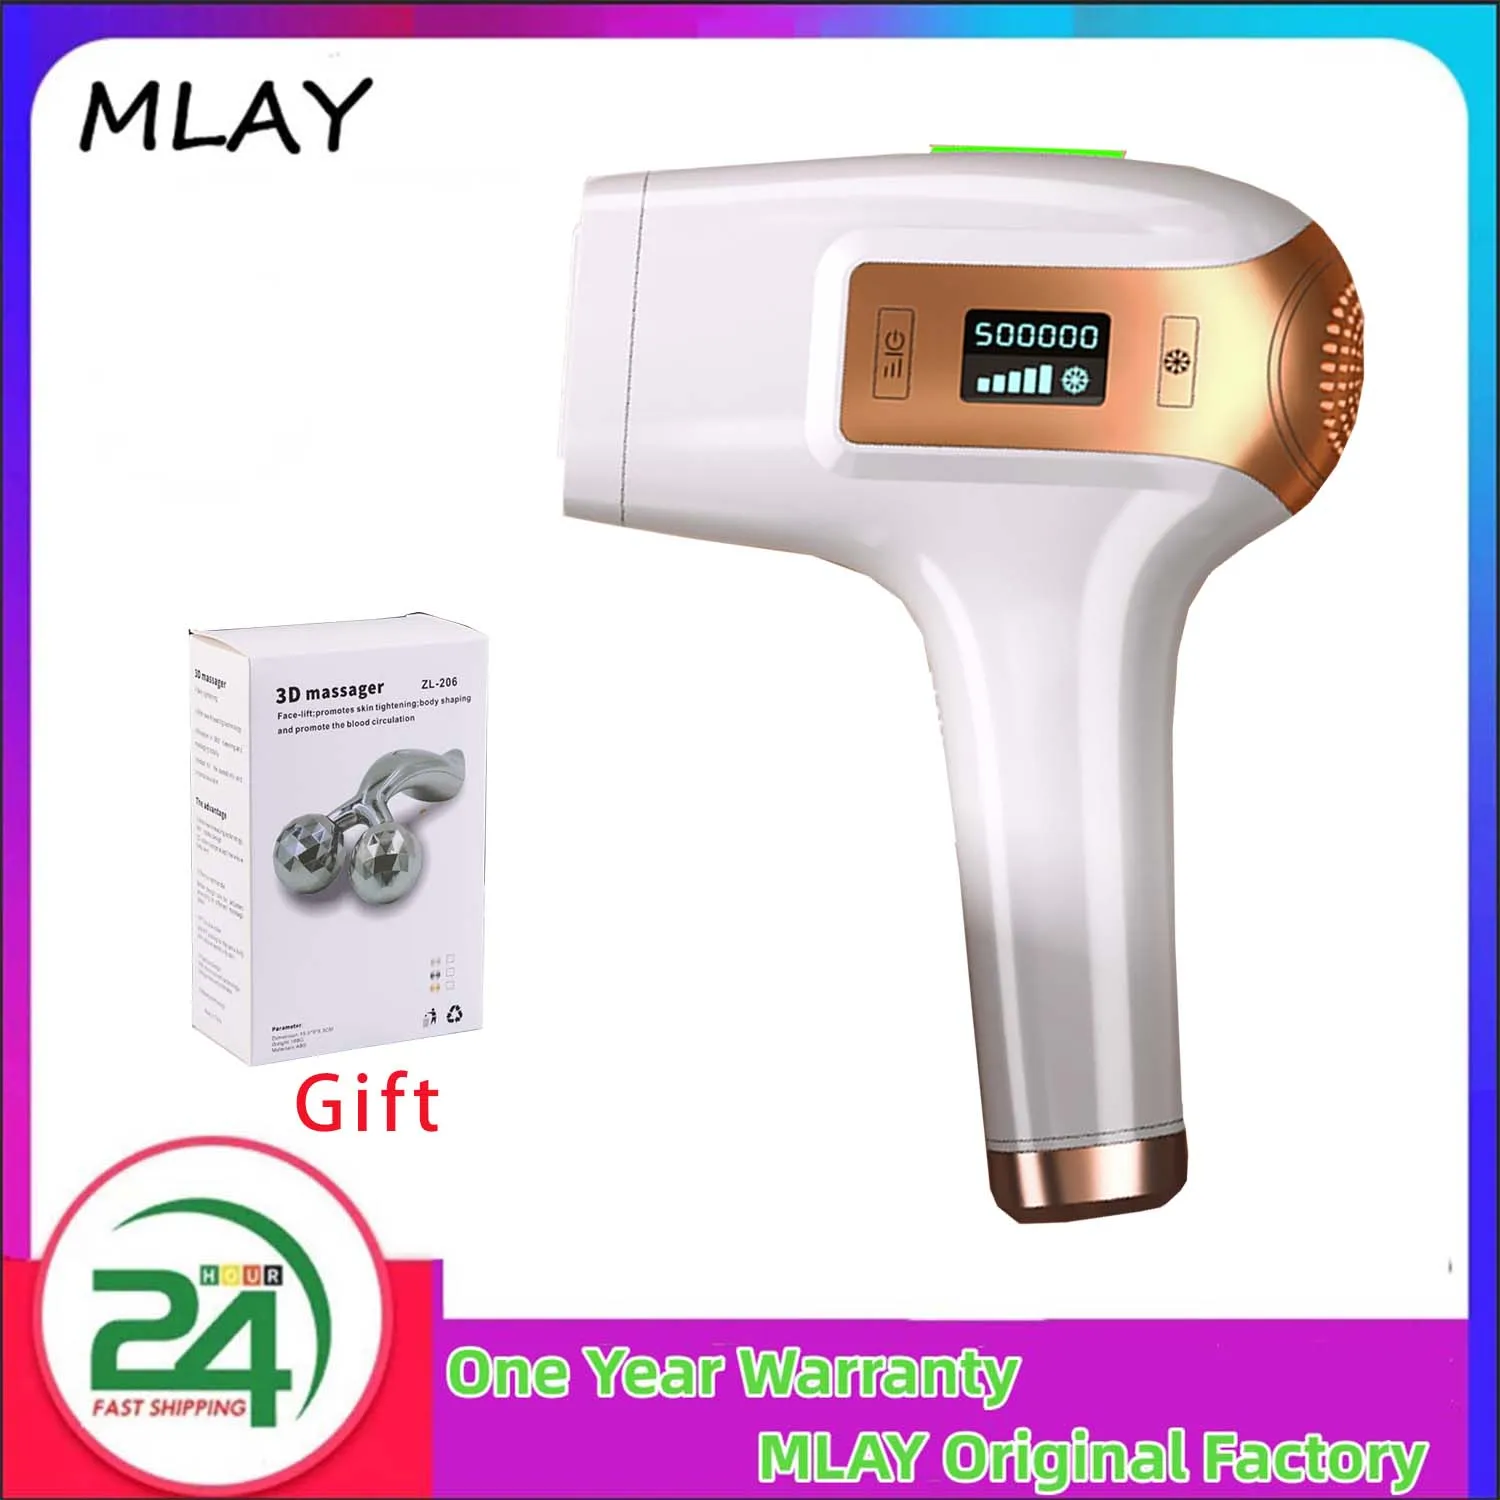 MLAY T5 Laser Ice Cold Hair Removal Device Home Full Body Bikini Epilation Flashes 500000 IPL Hair Removal Painless Dropshipping enlarge